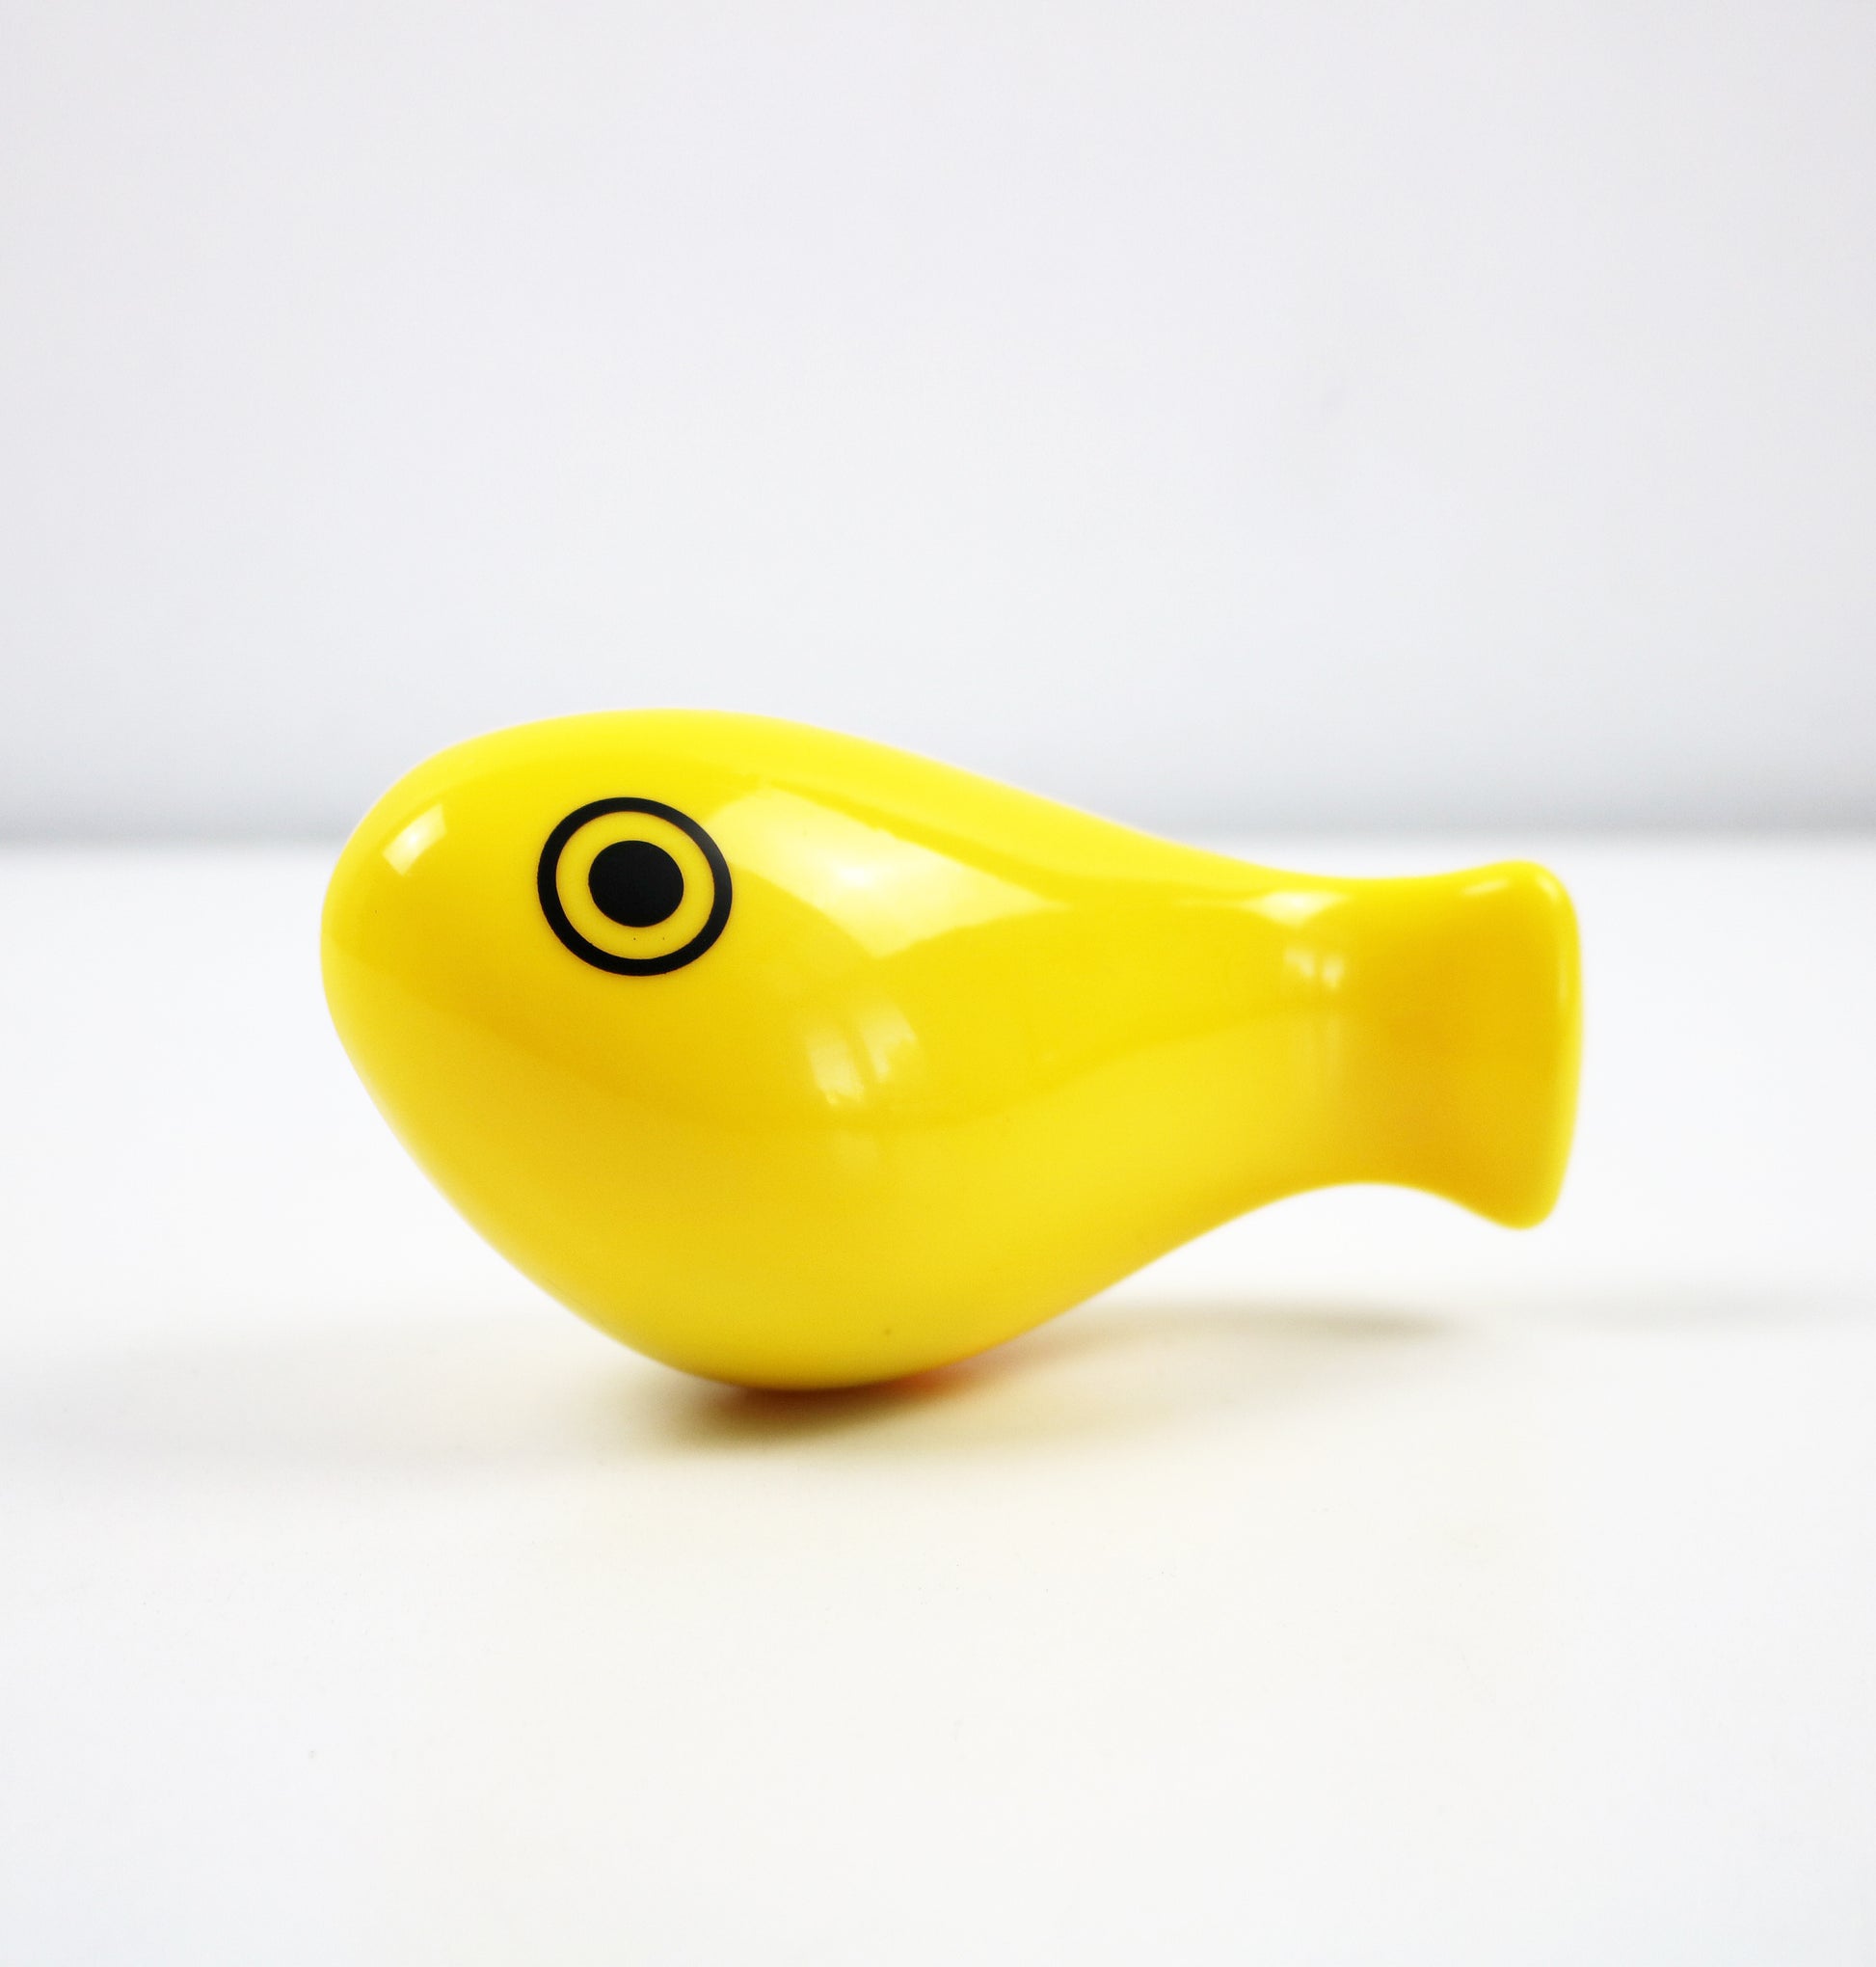 1970 award winning design from Patrick Rylands for Ambi Toys. Iconic yellow fish bath toy re-issued  by Galt in 2014. Unused in original packaging